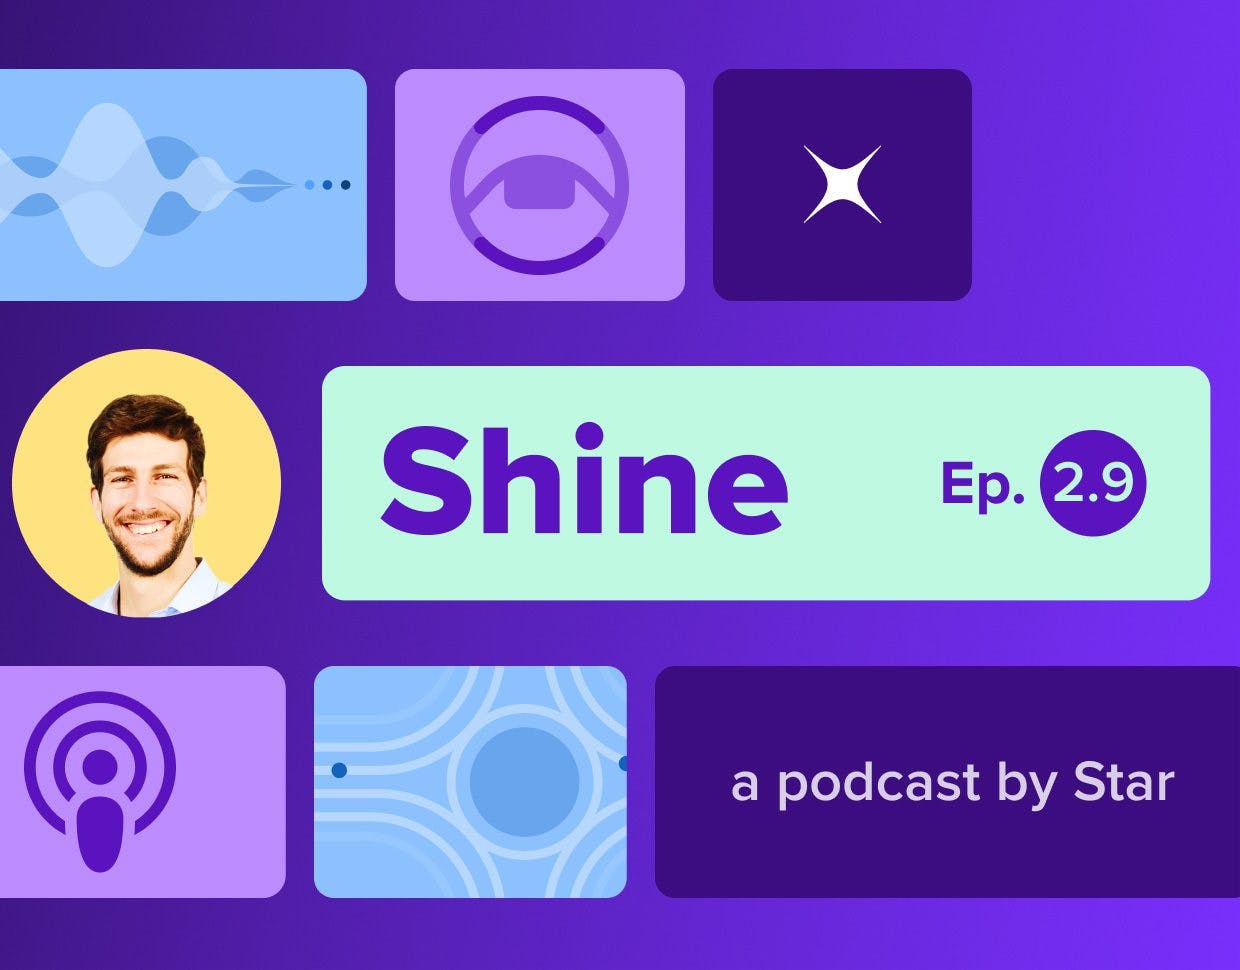 Shine: a podcast by Star, Ep. 2.9